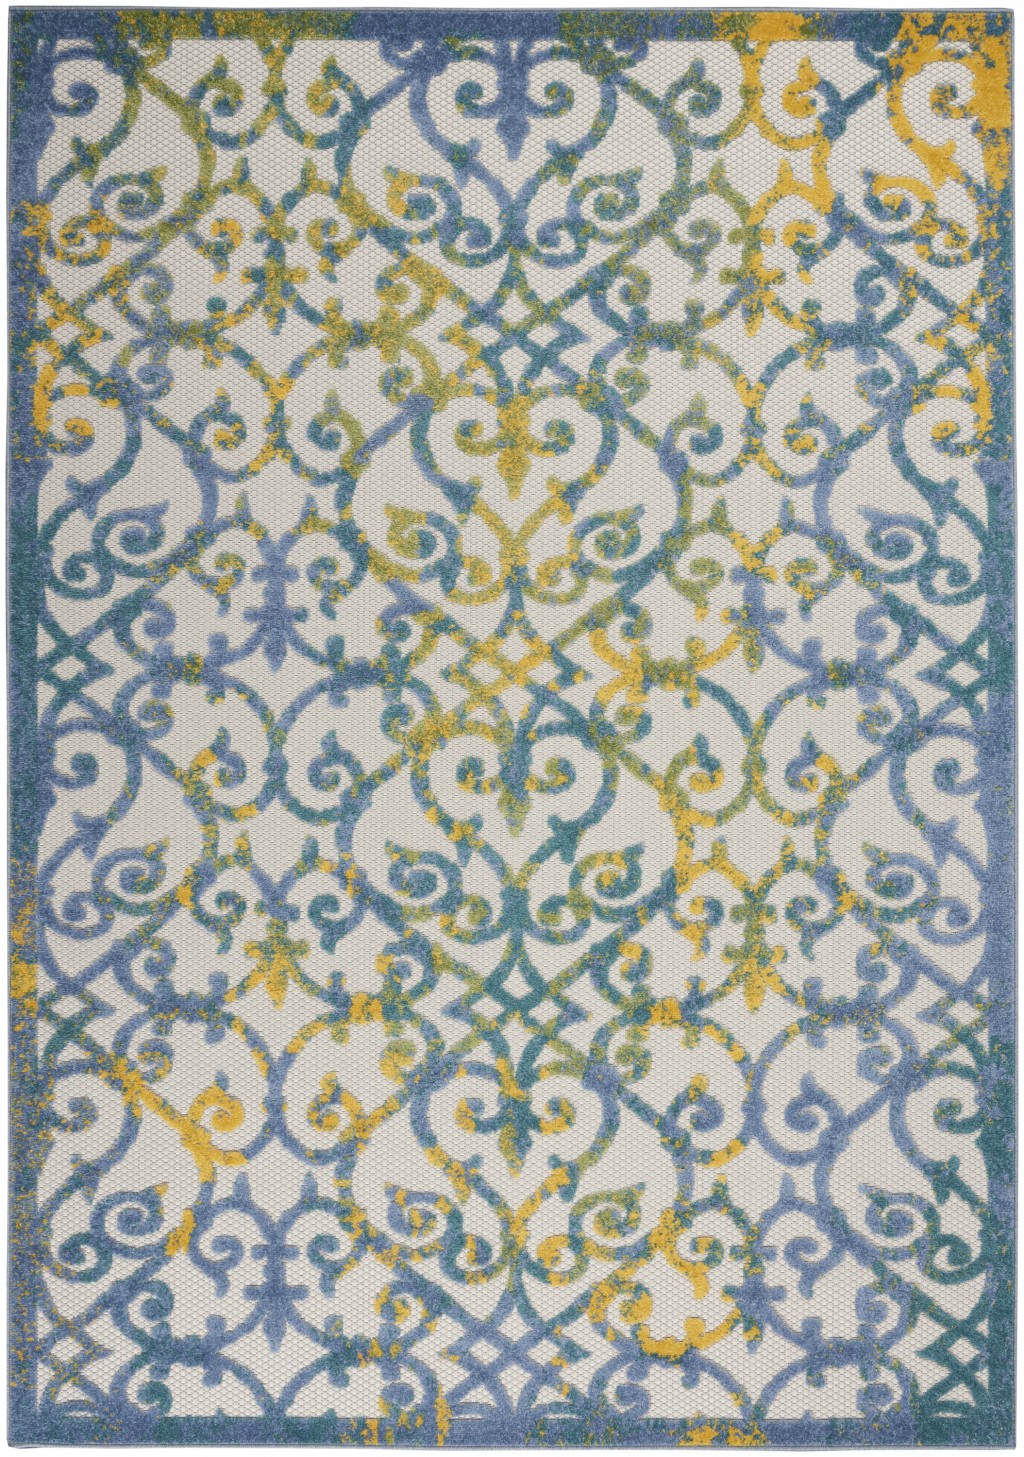 4' X 6' Ivory And Blue Floral Indoor Outdoor Area Rug-385017-1